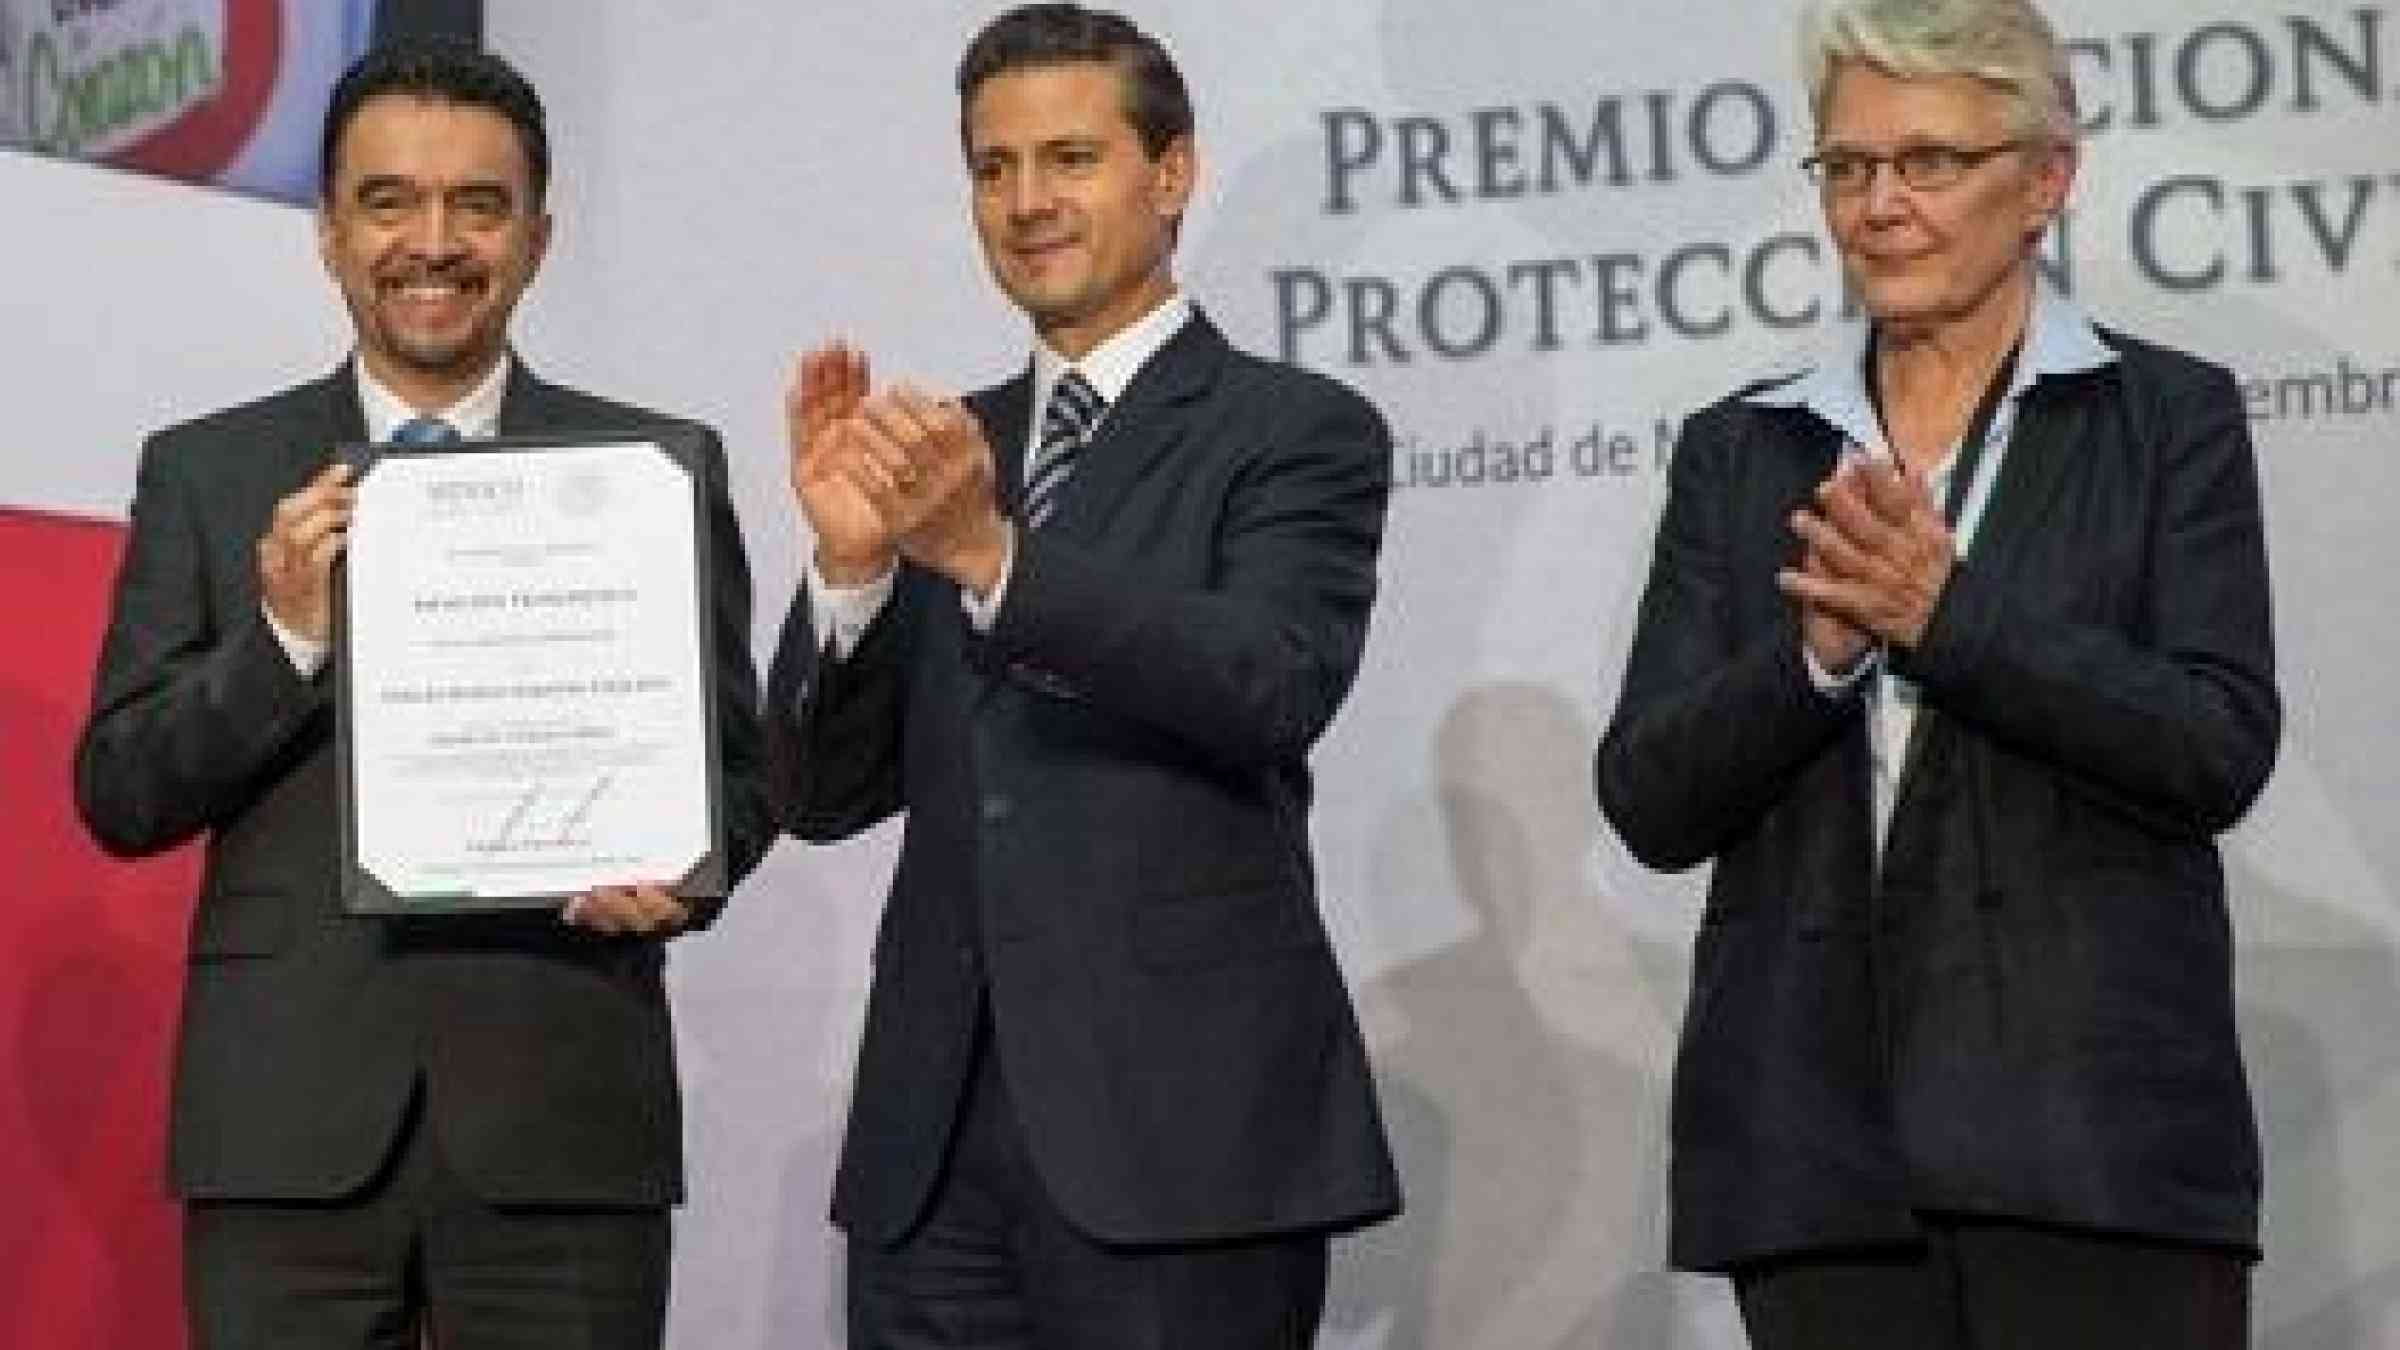 from left to right, At the National Civil Protection Awards in Mexico, Sergio Almazan, Founder and President of Project Chema Tierra, President of Mexico, Enrique Pena Nieto, and head of UNISDR, Margareta Wahlstrom.